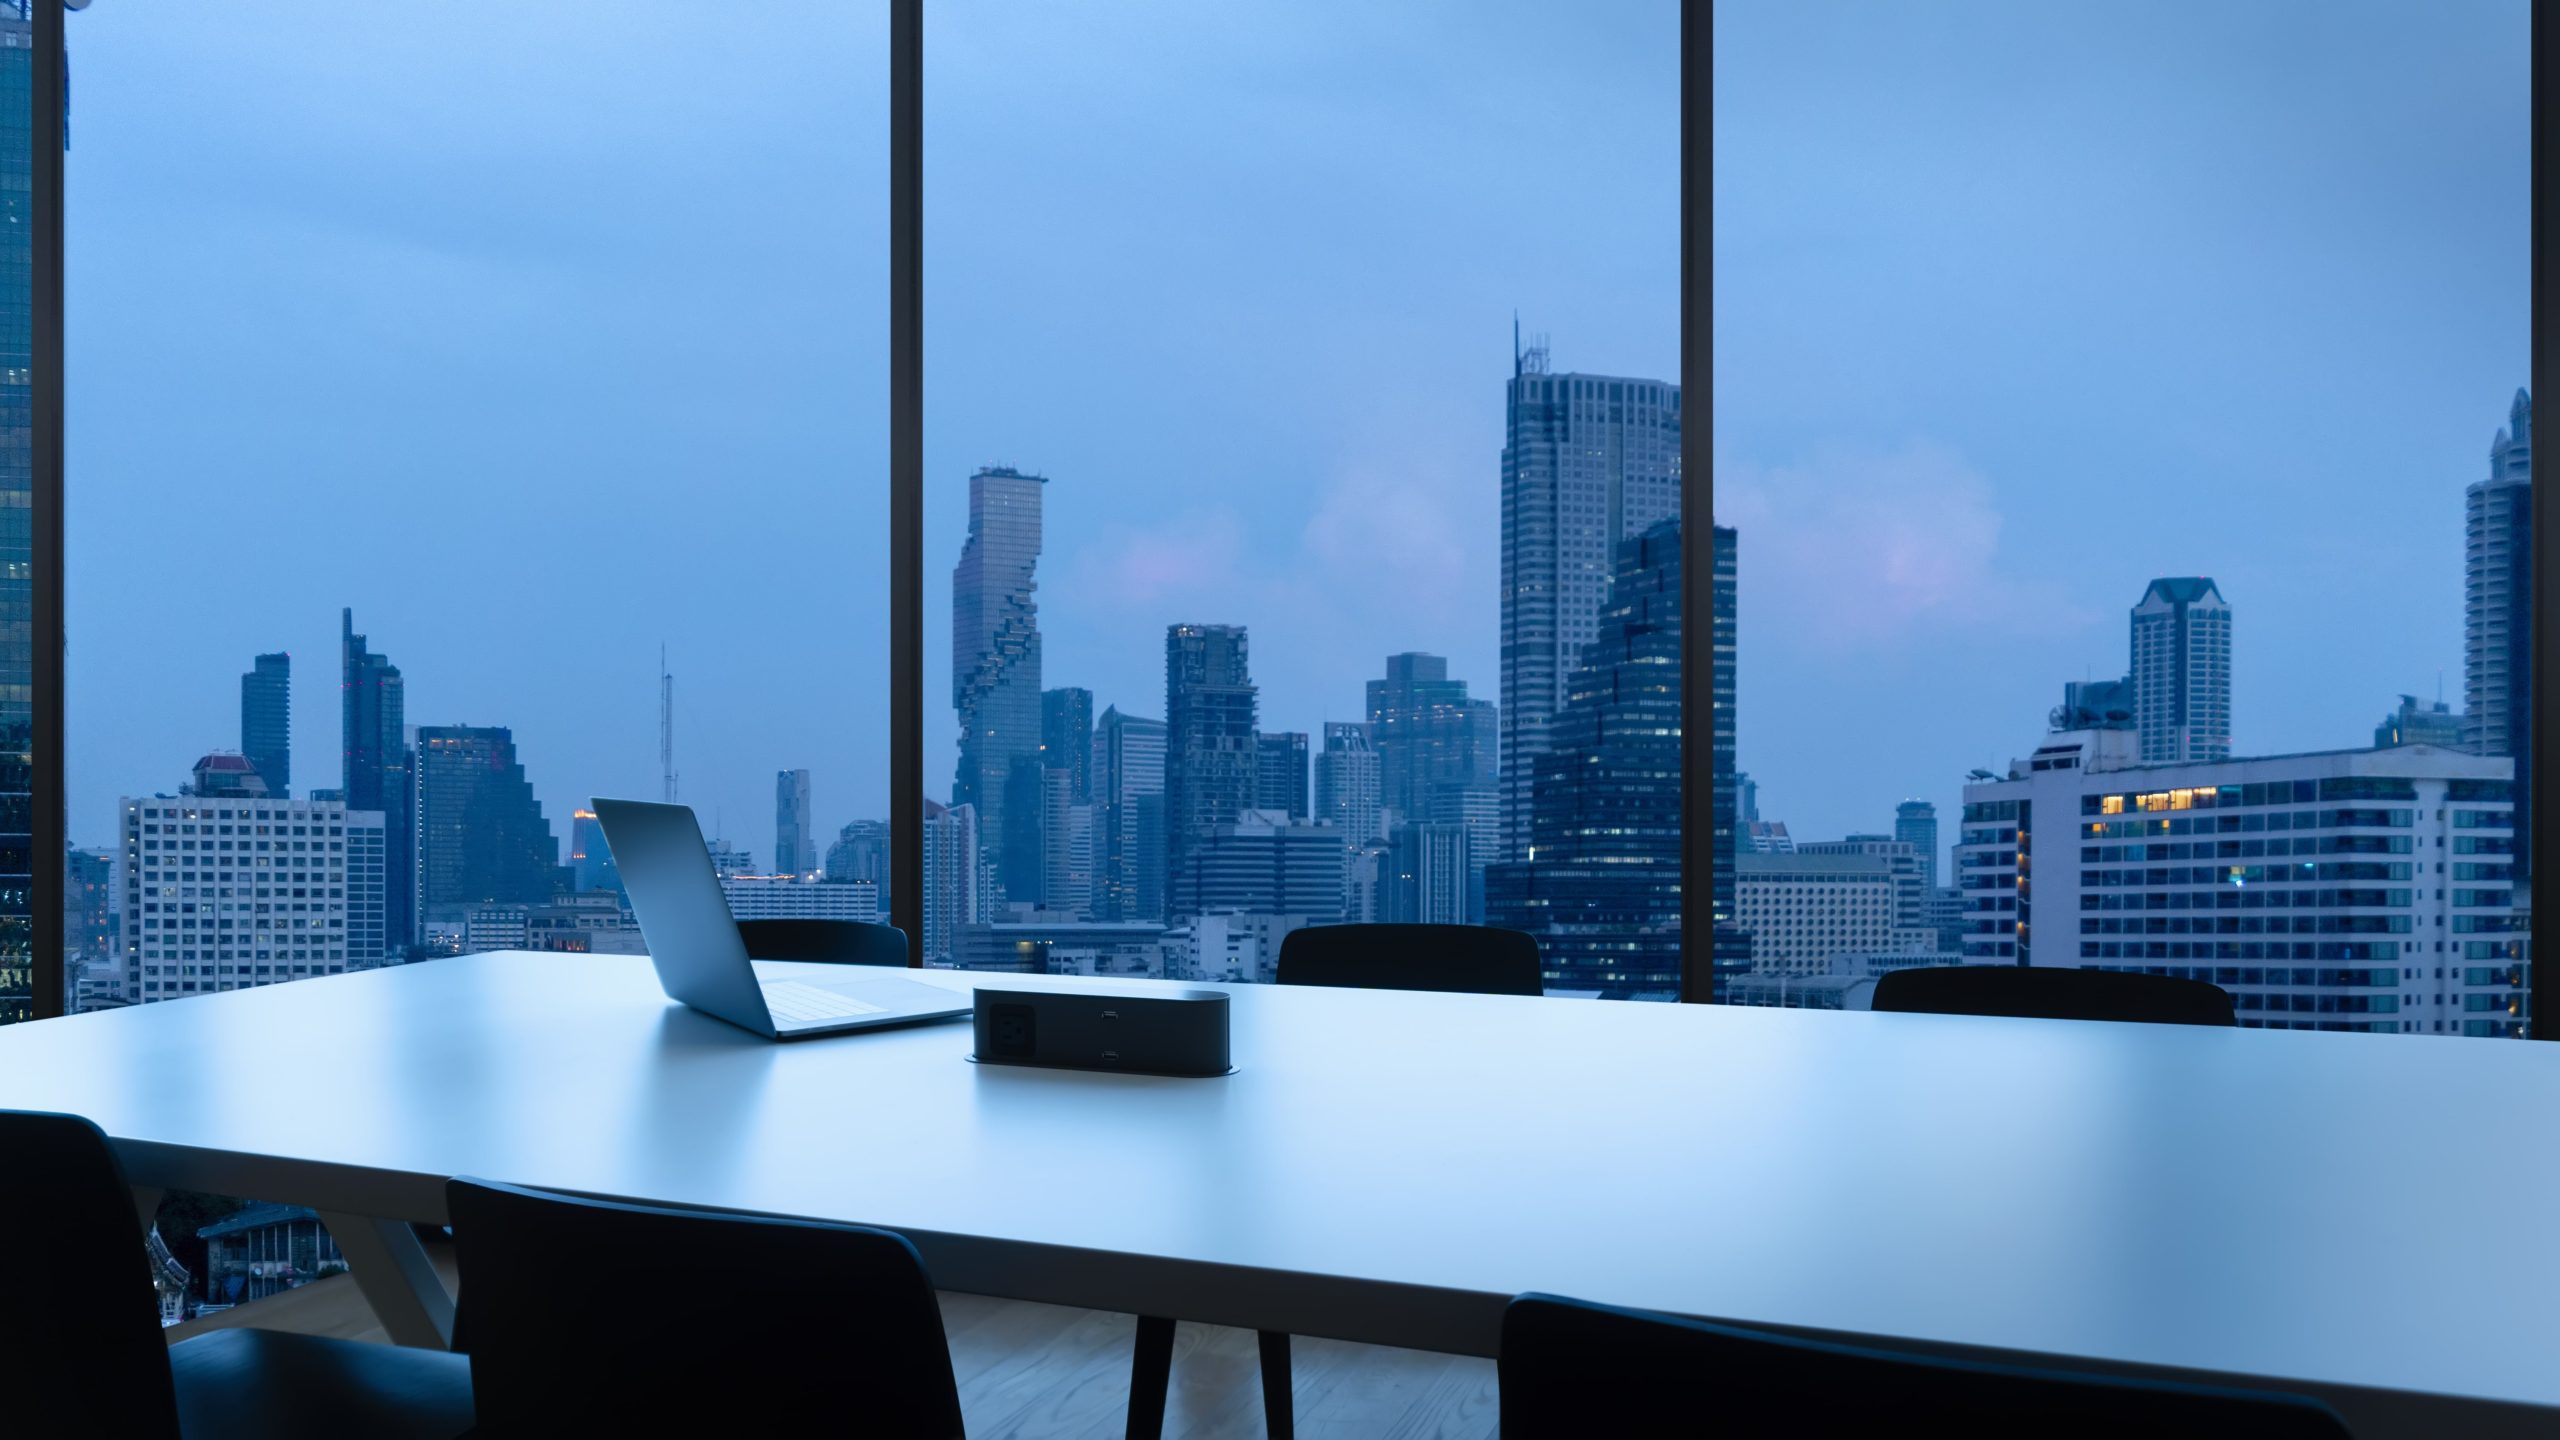 meeting-room-workplace-with-notebook-laptop-comfortable-work-table-office-windows-bangkok-city-view-min